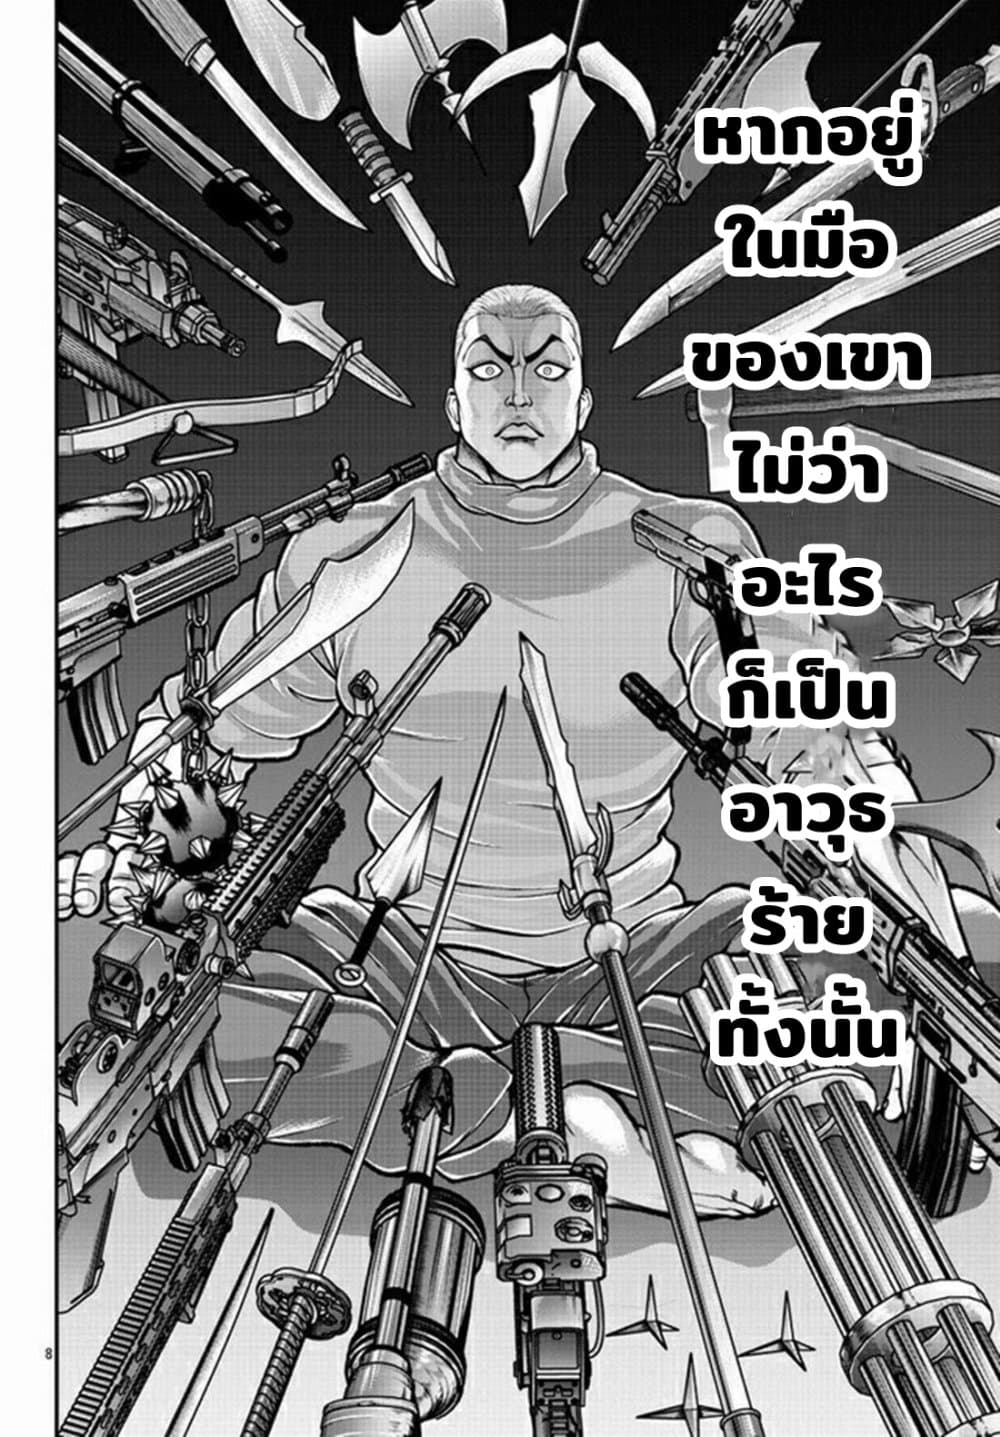 Godsian Masian from Another World 26 แปลไทย